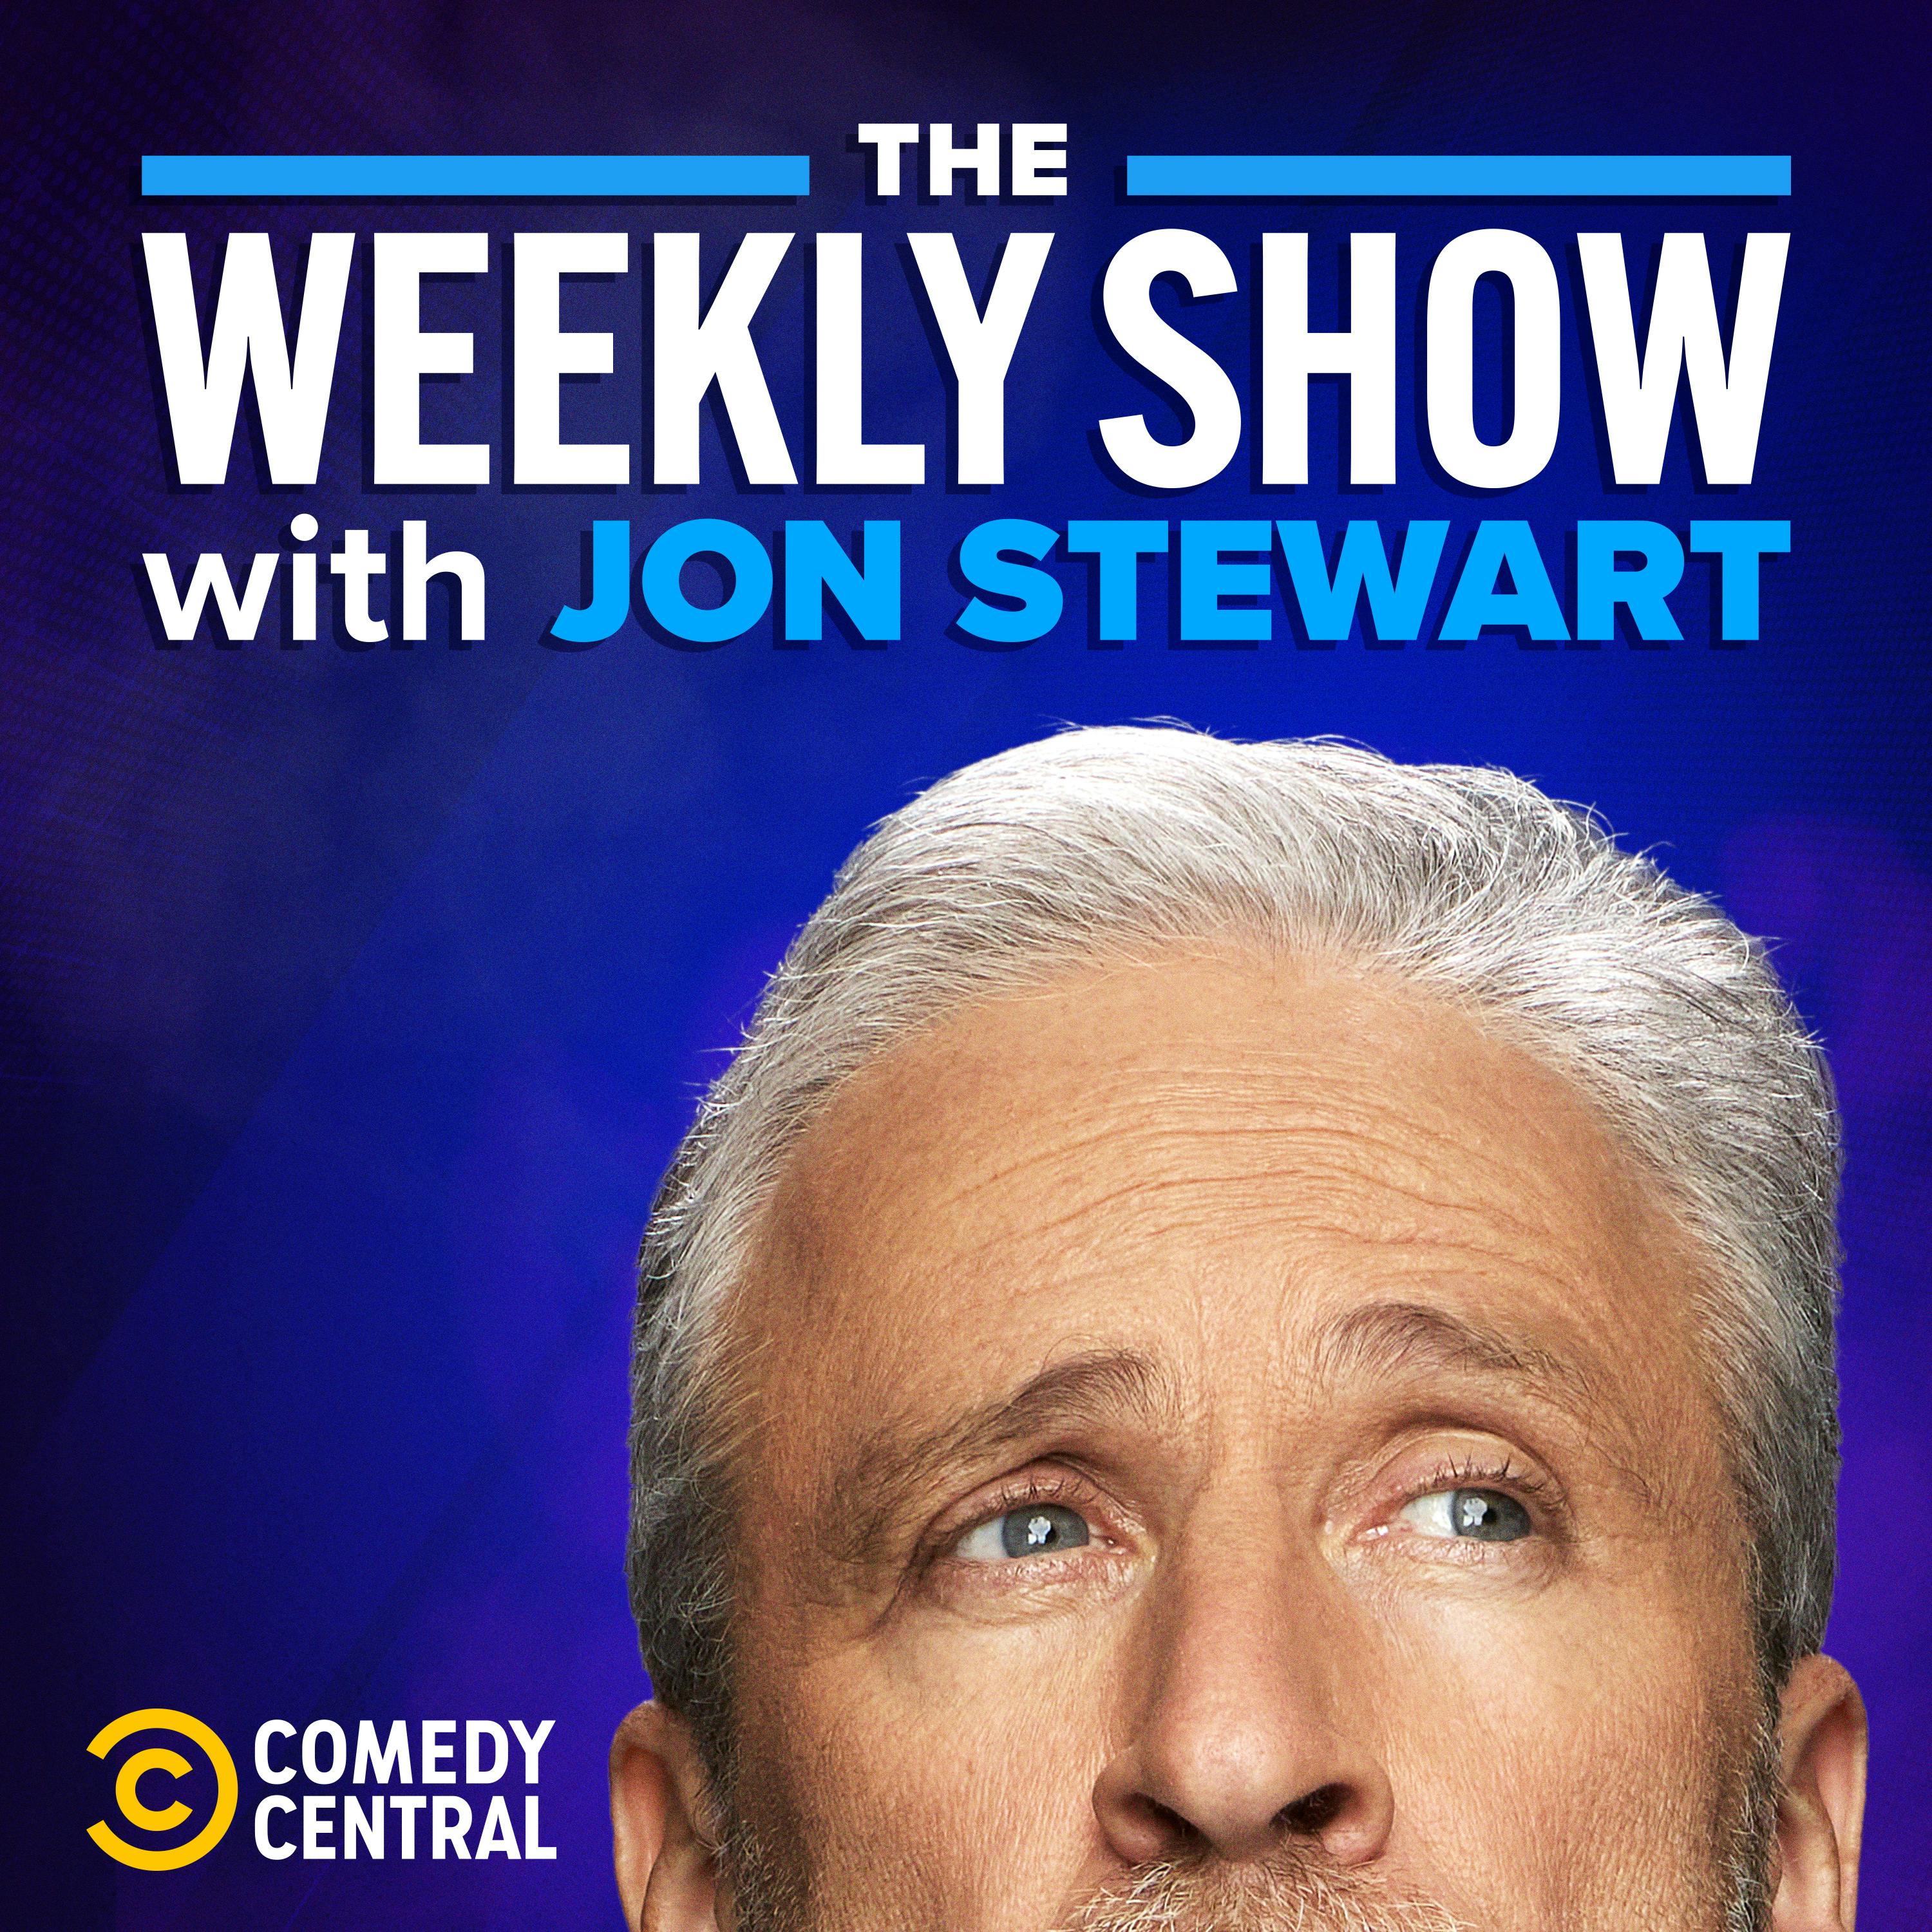 The Weekly Show with Jon Stewart:Comedy Central